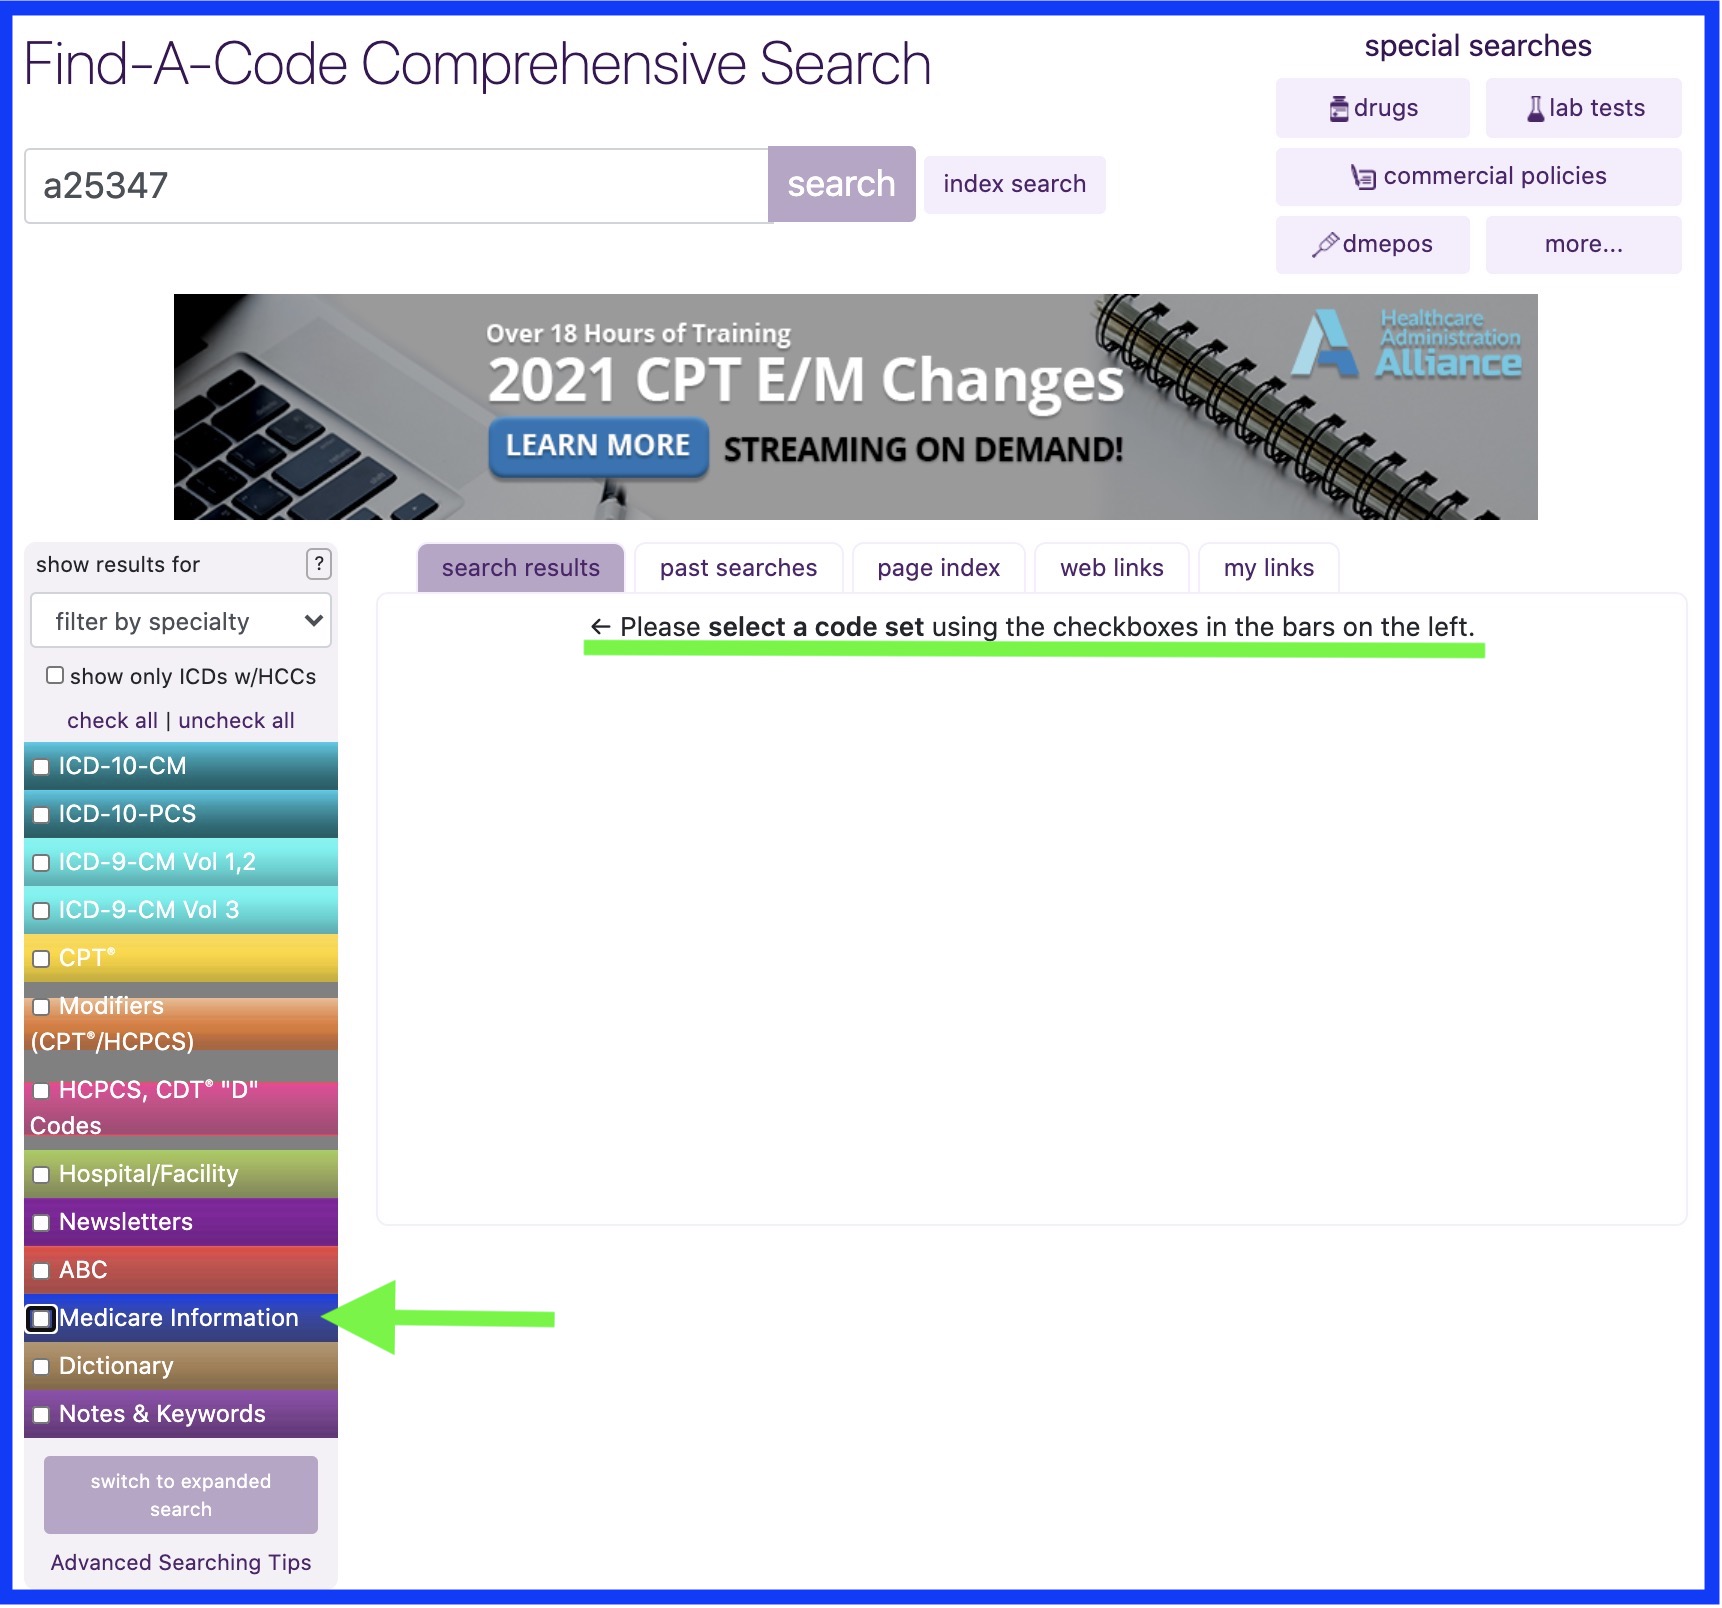 FAC Home Page Search Option